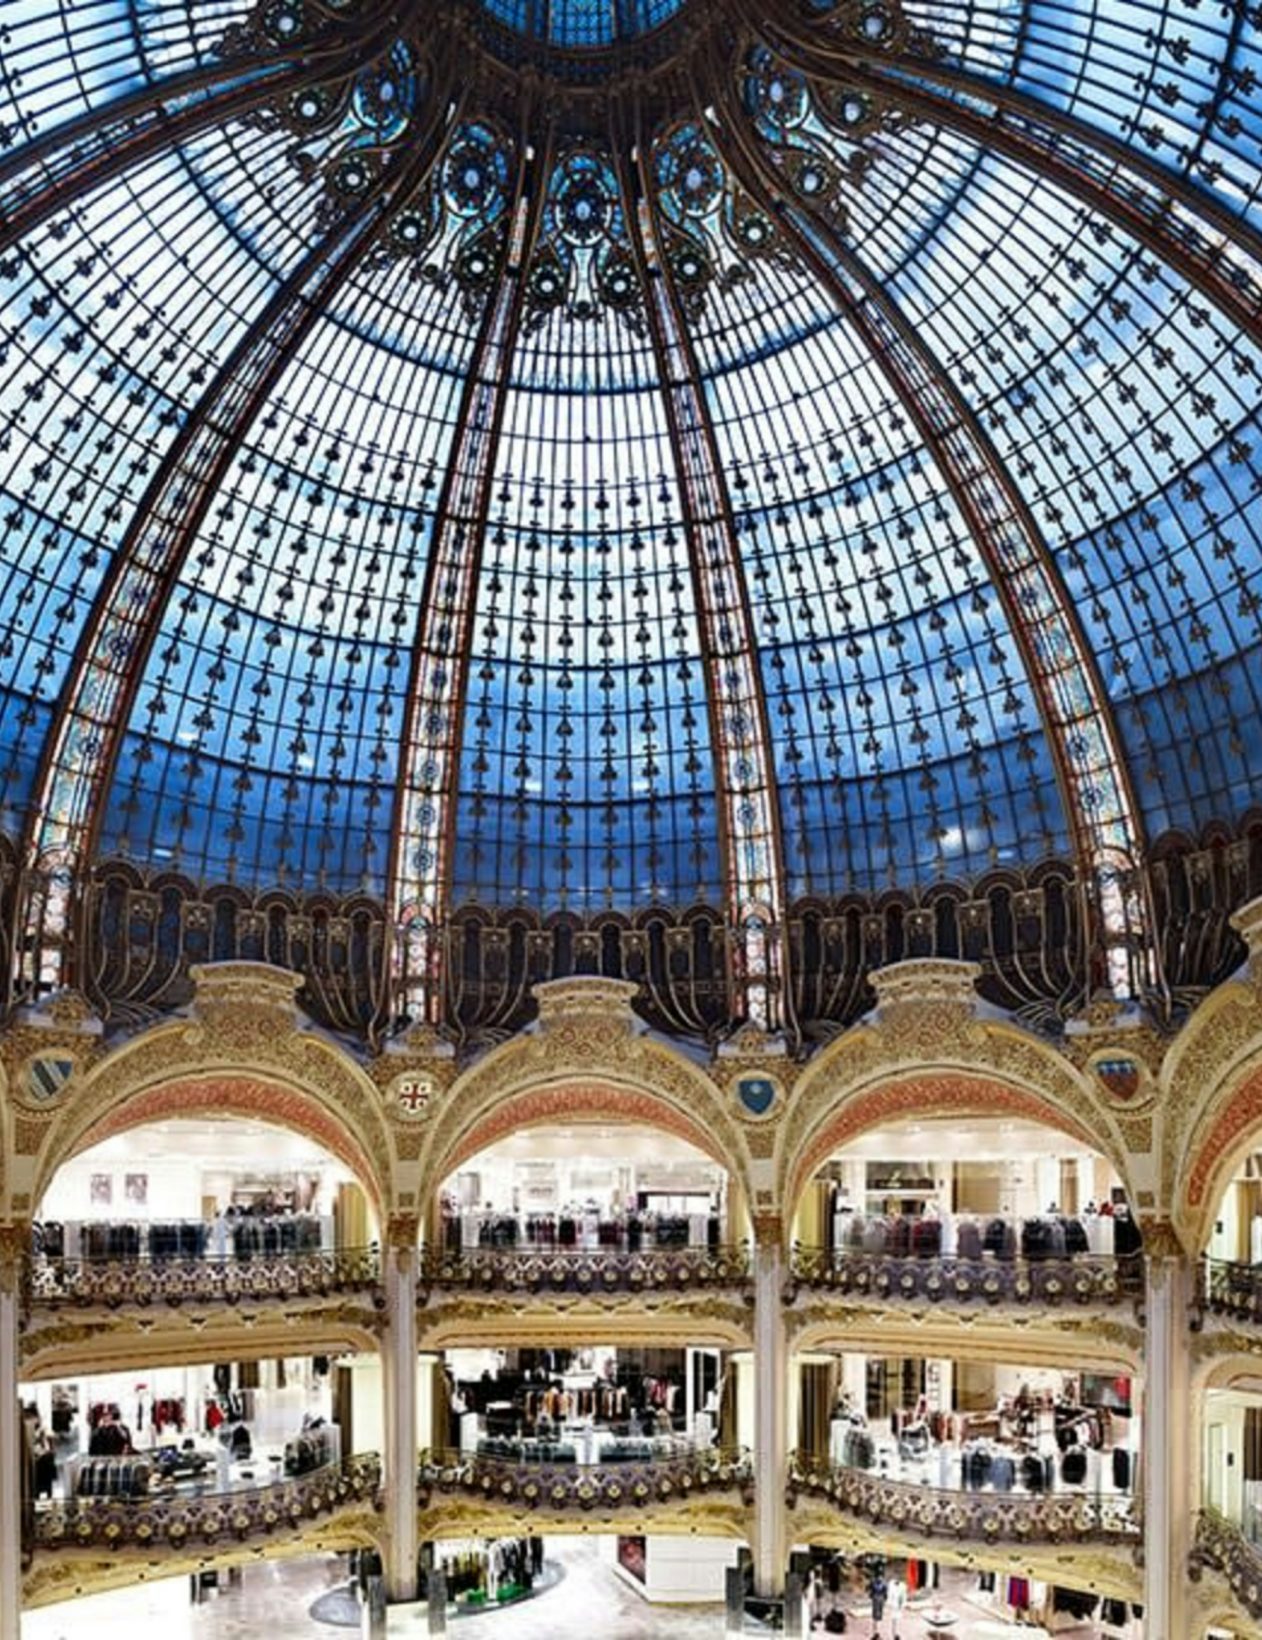 The Galeries Lafayette are expanding massively abroad